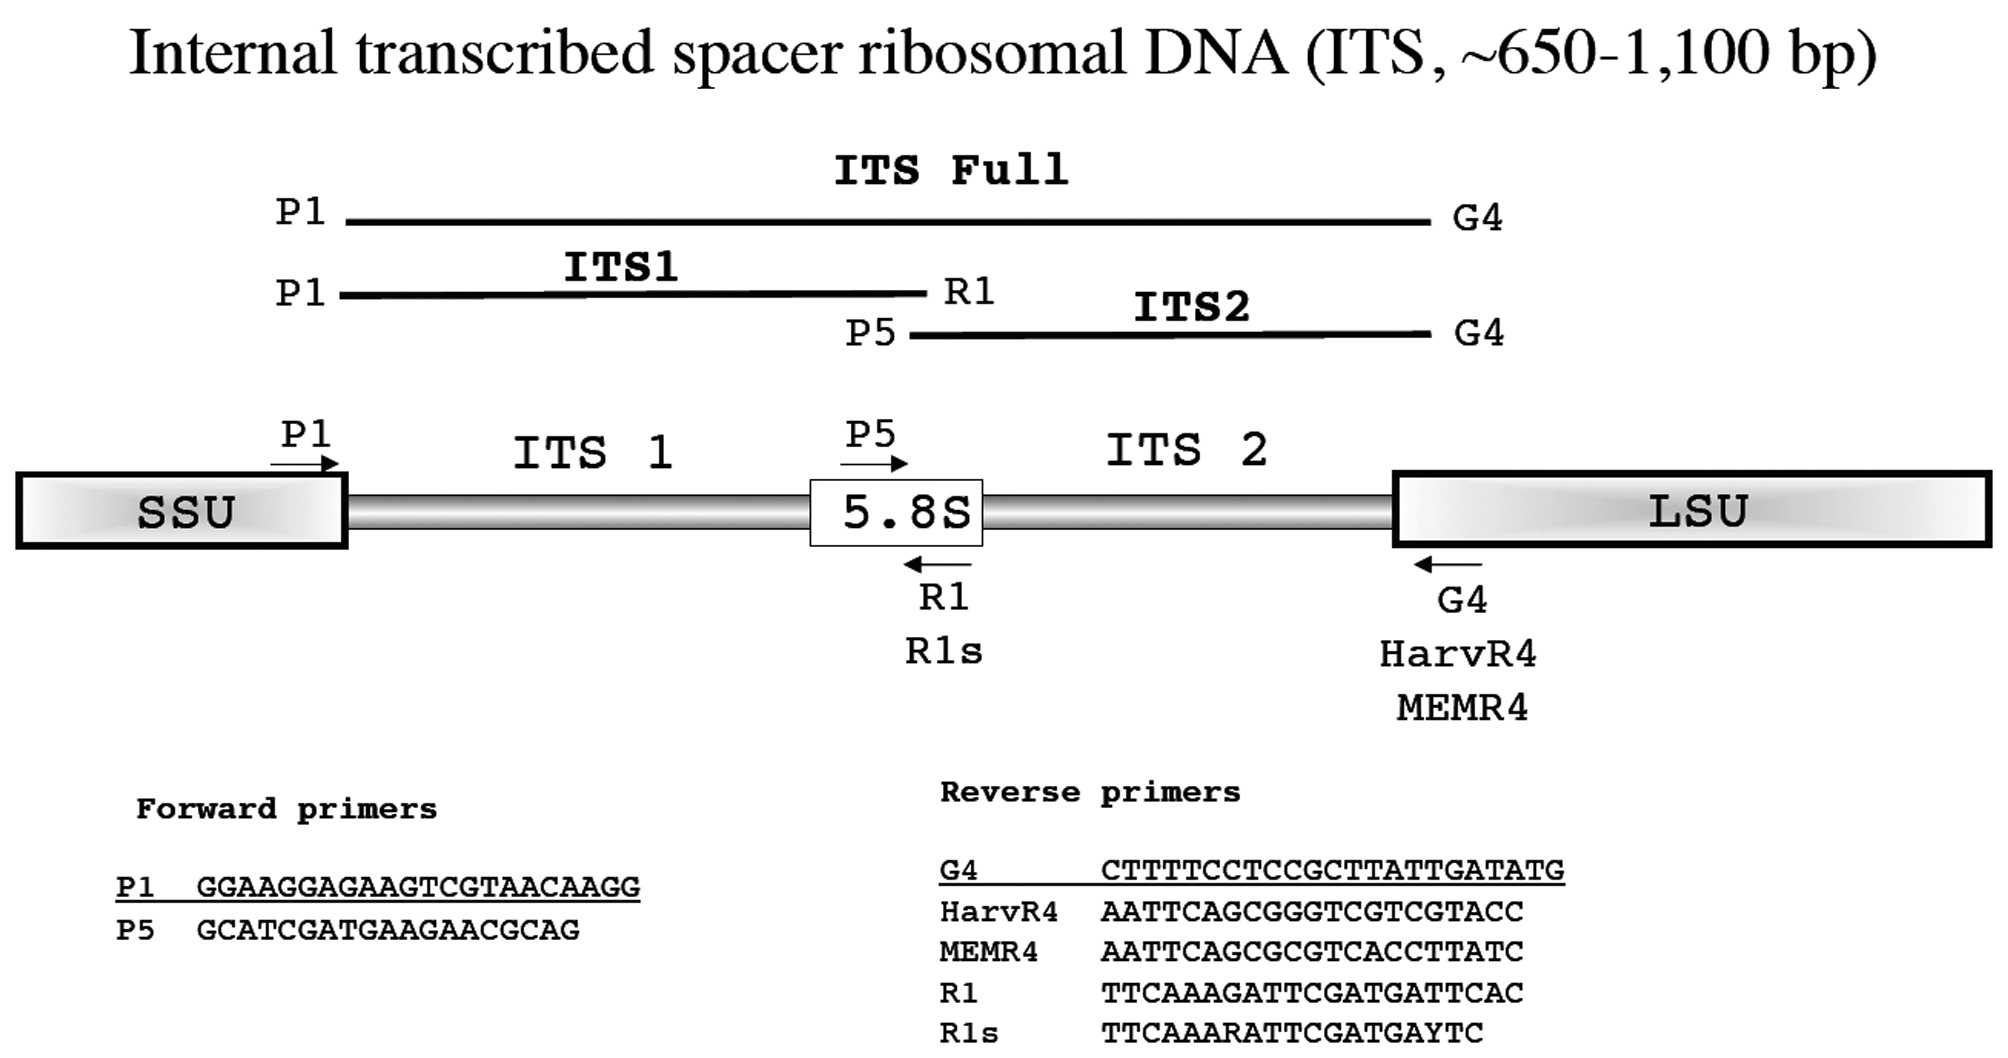 Overview of PCR / sequencing strategy for the nuclear internal transcribed spacer (ITS).